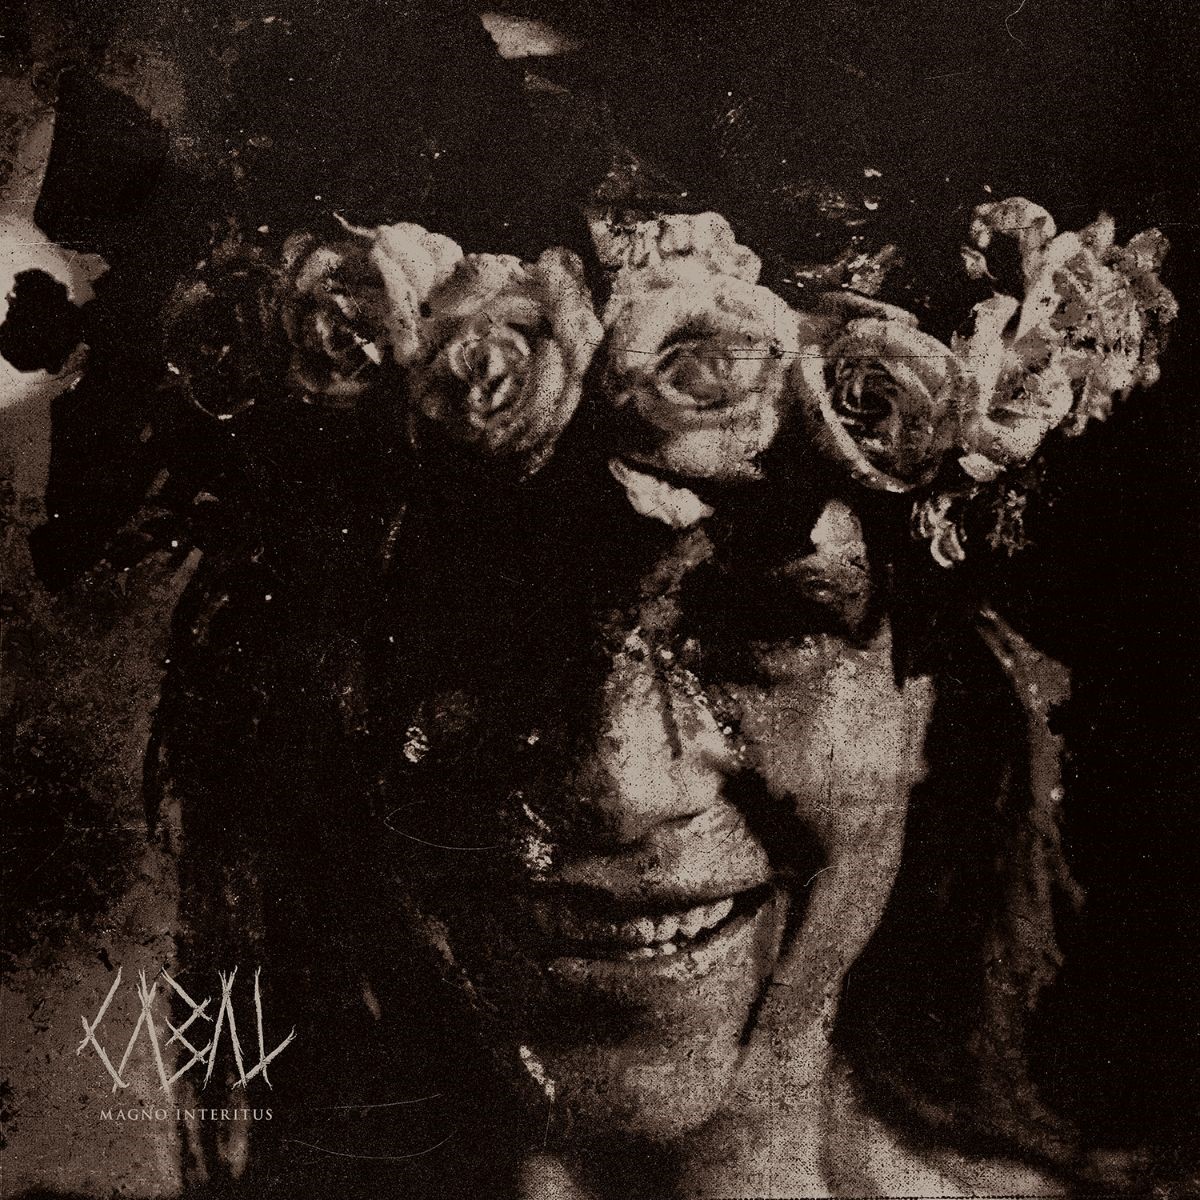 Cover art for "Cabal" by Exit Wound. Statue of a woman making an eerie smile and wearing a flower crown.